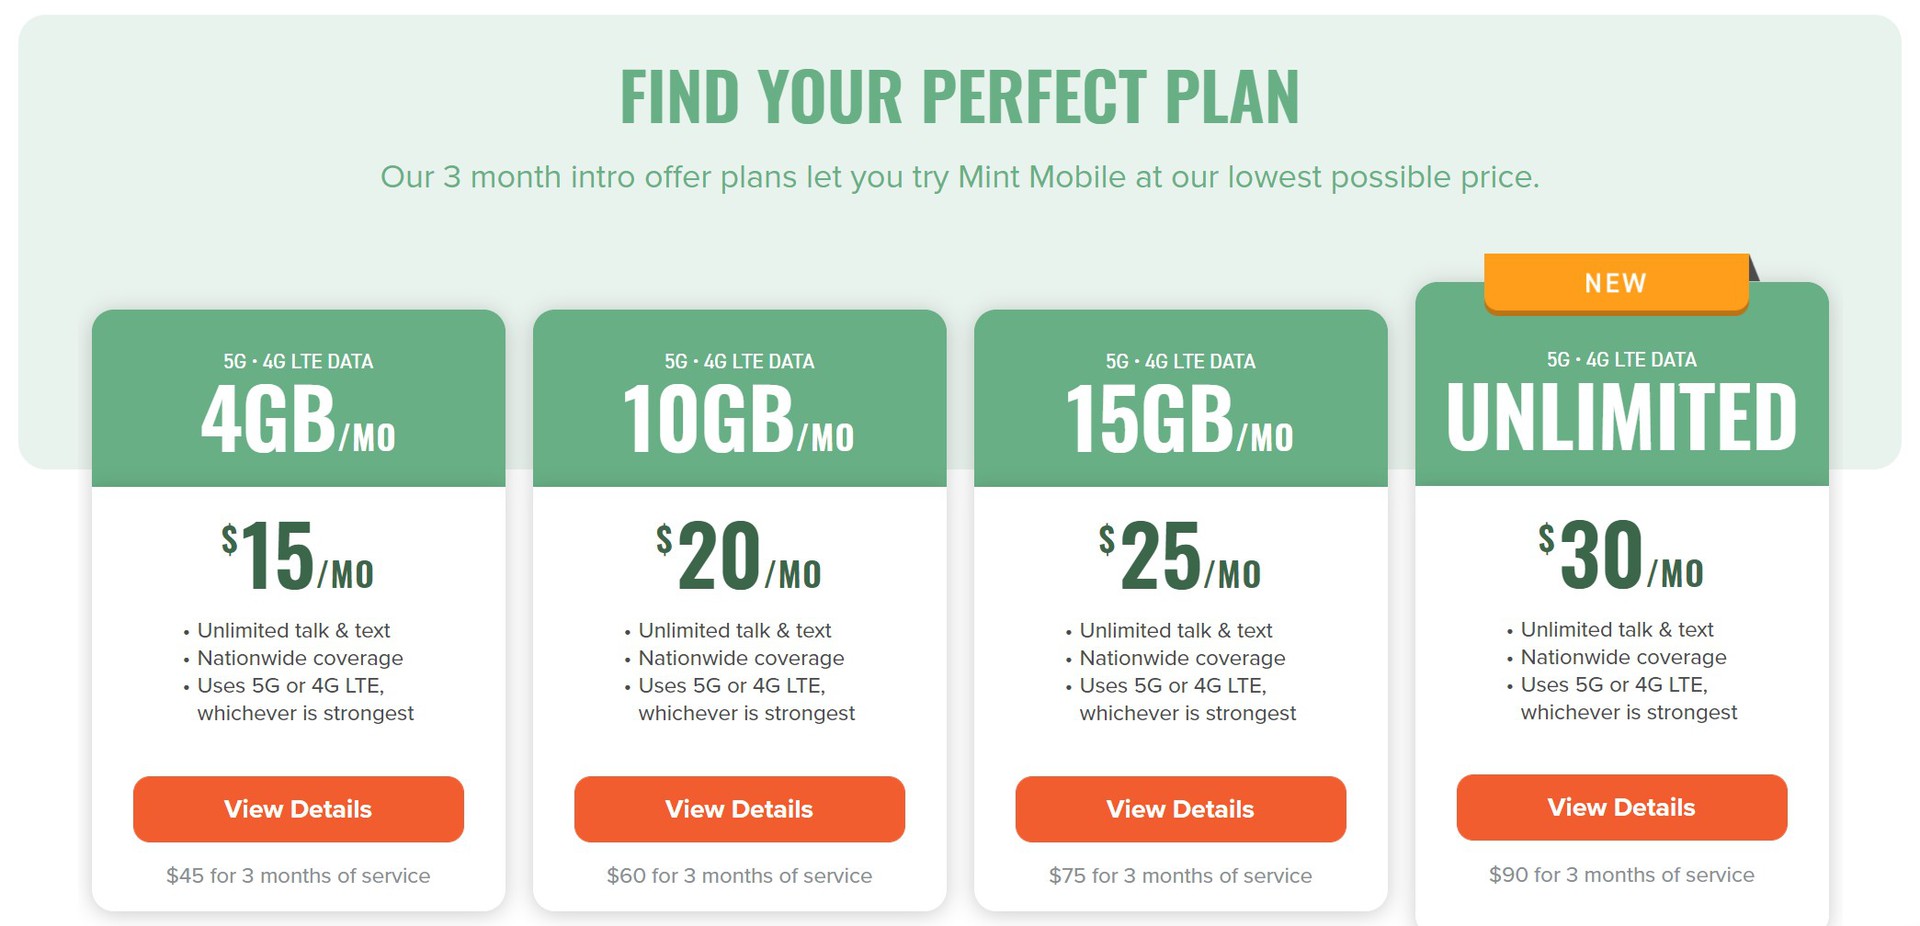 4 Mint Mobile Review